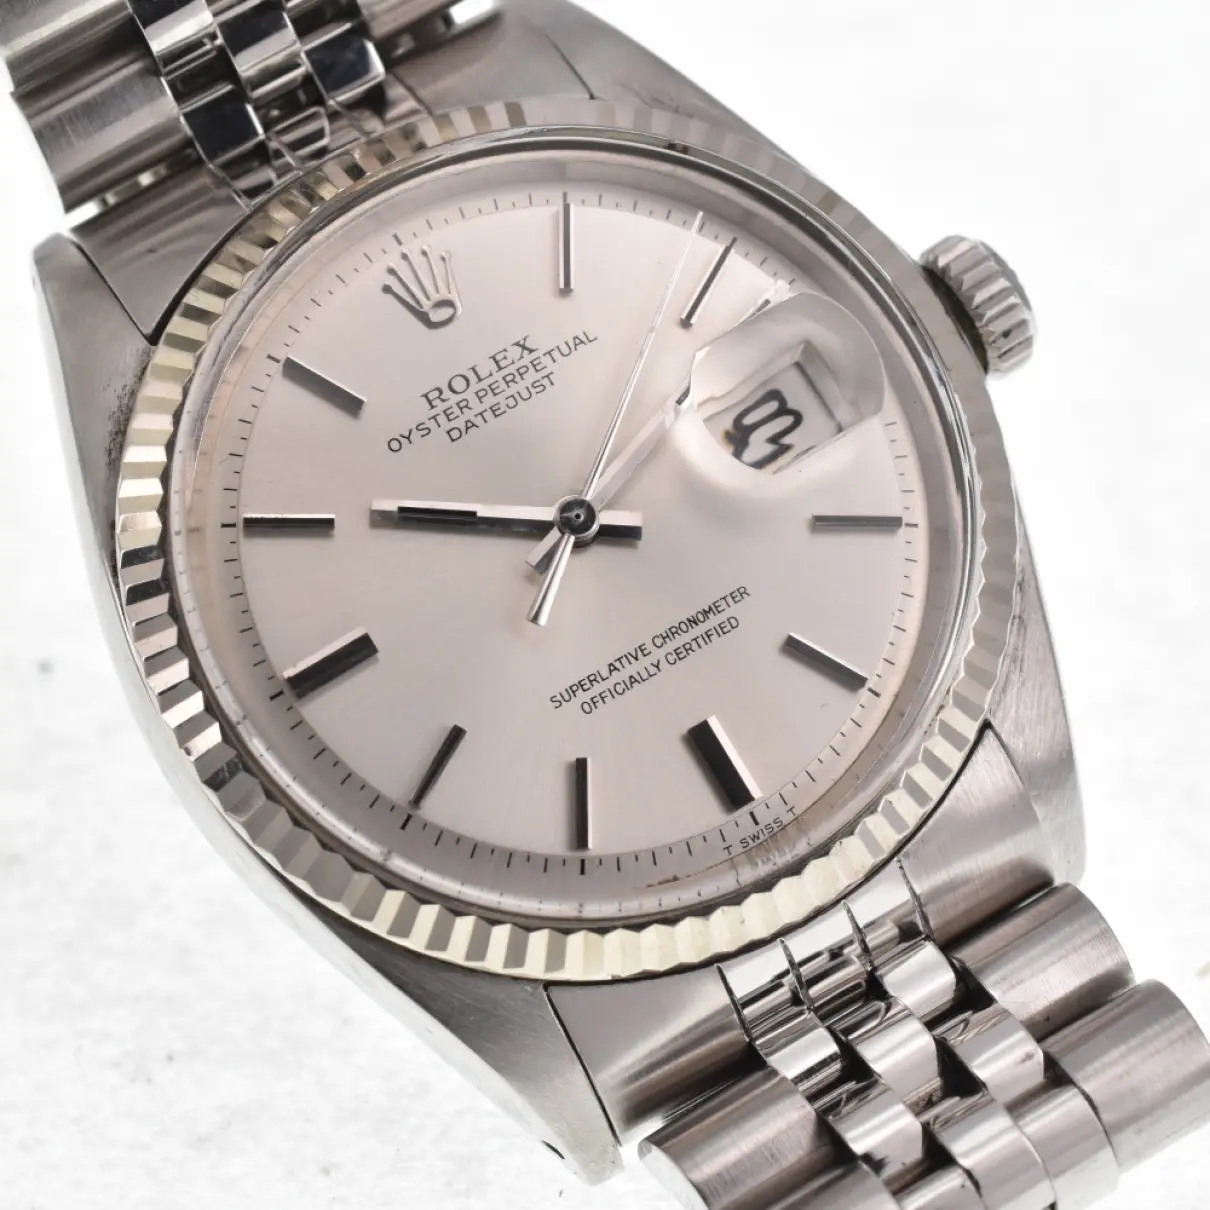 Oyster Perpetual 36mm watch Rolex